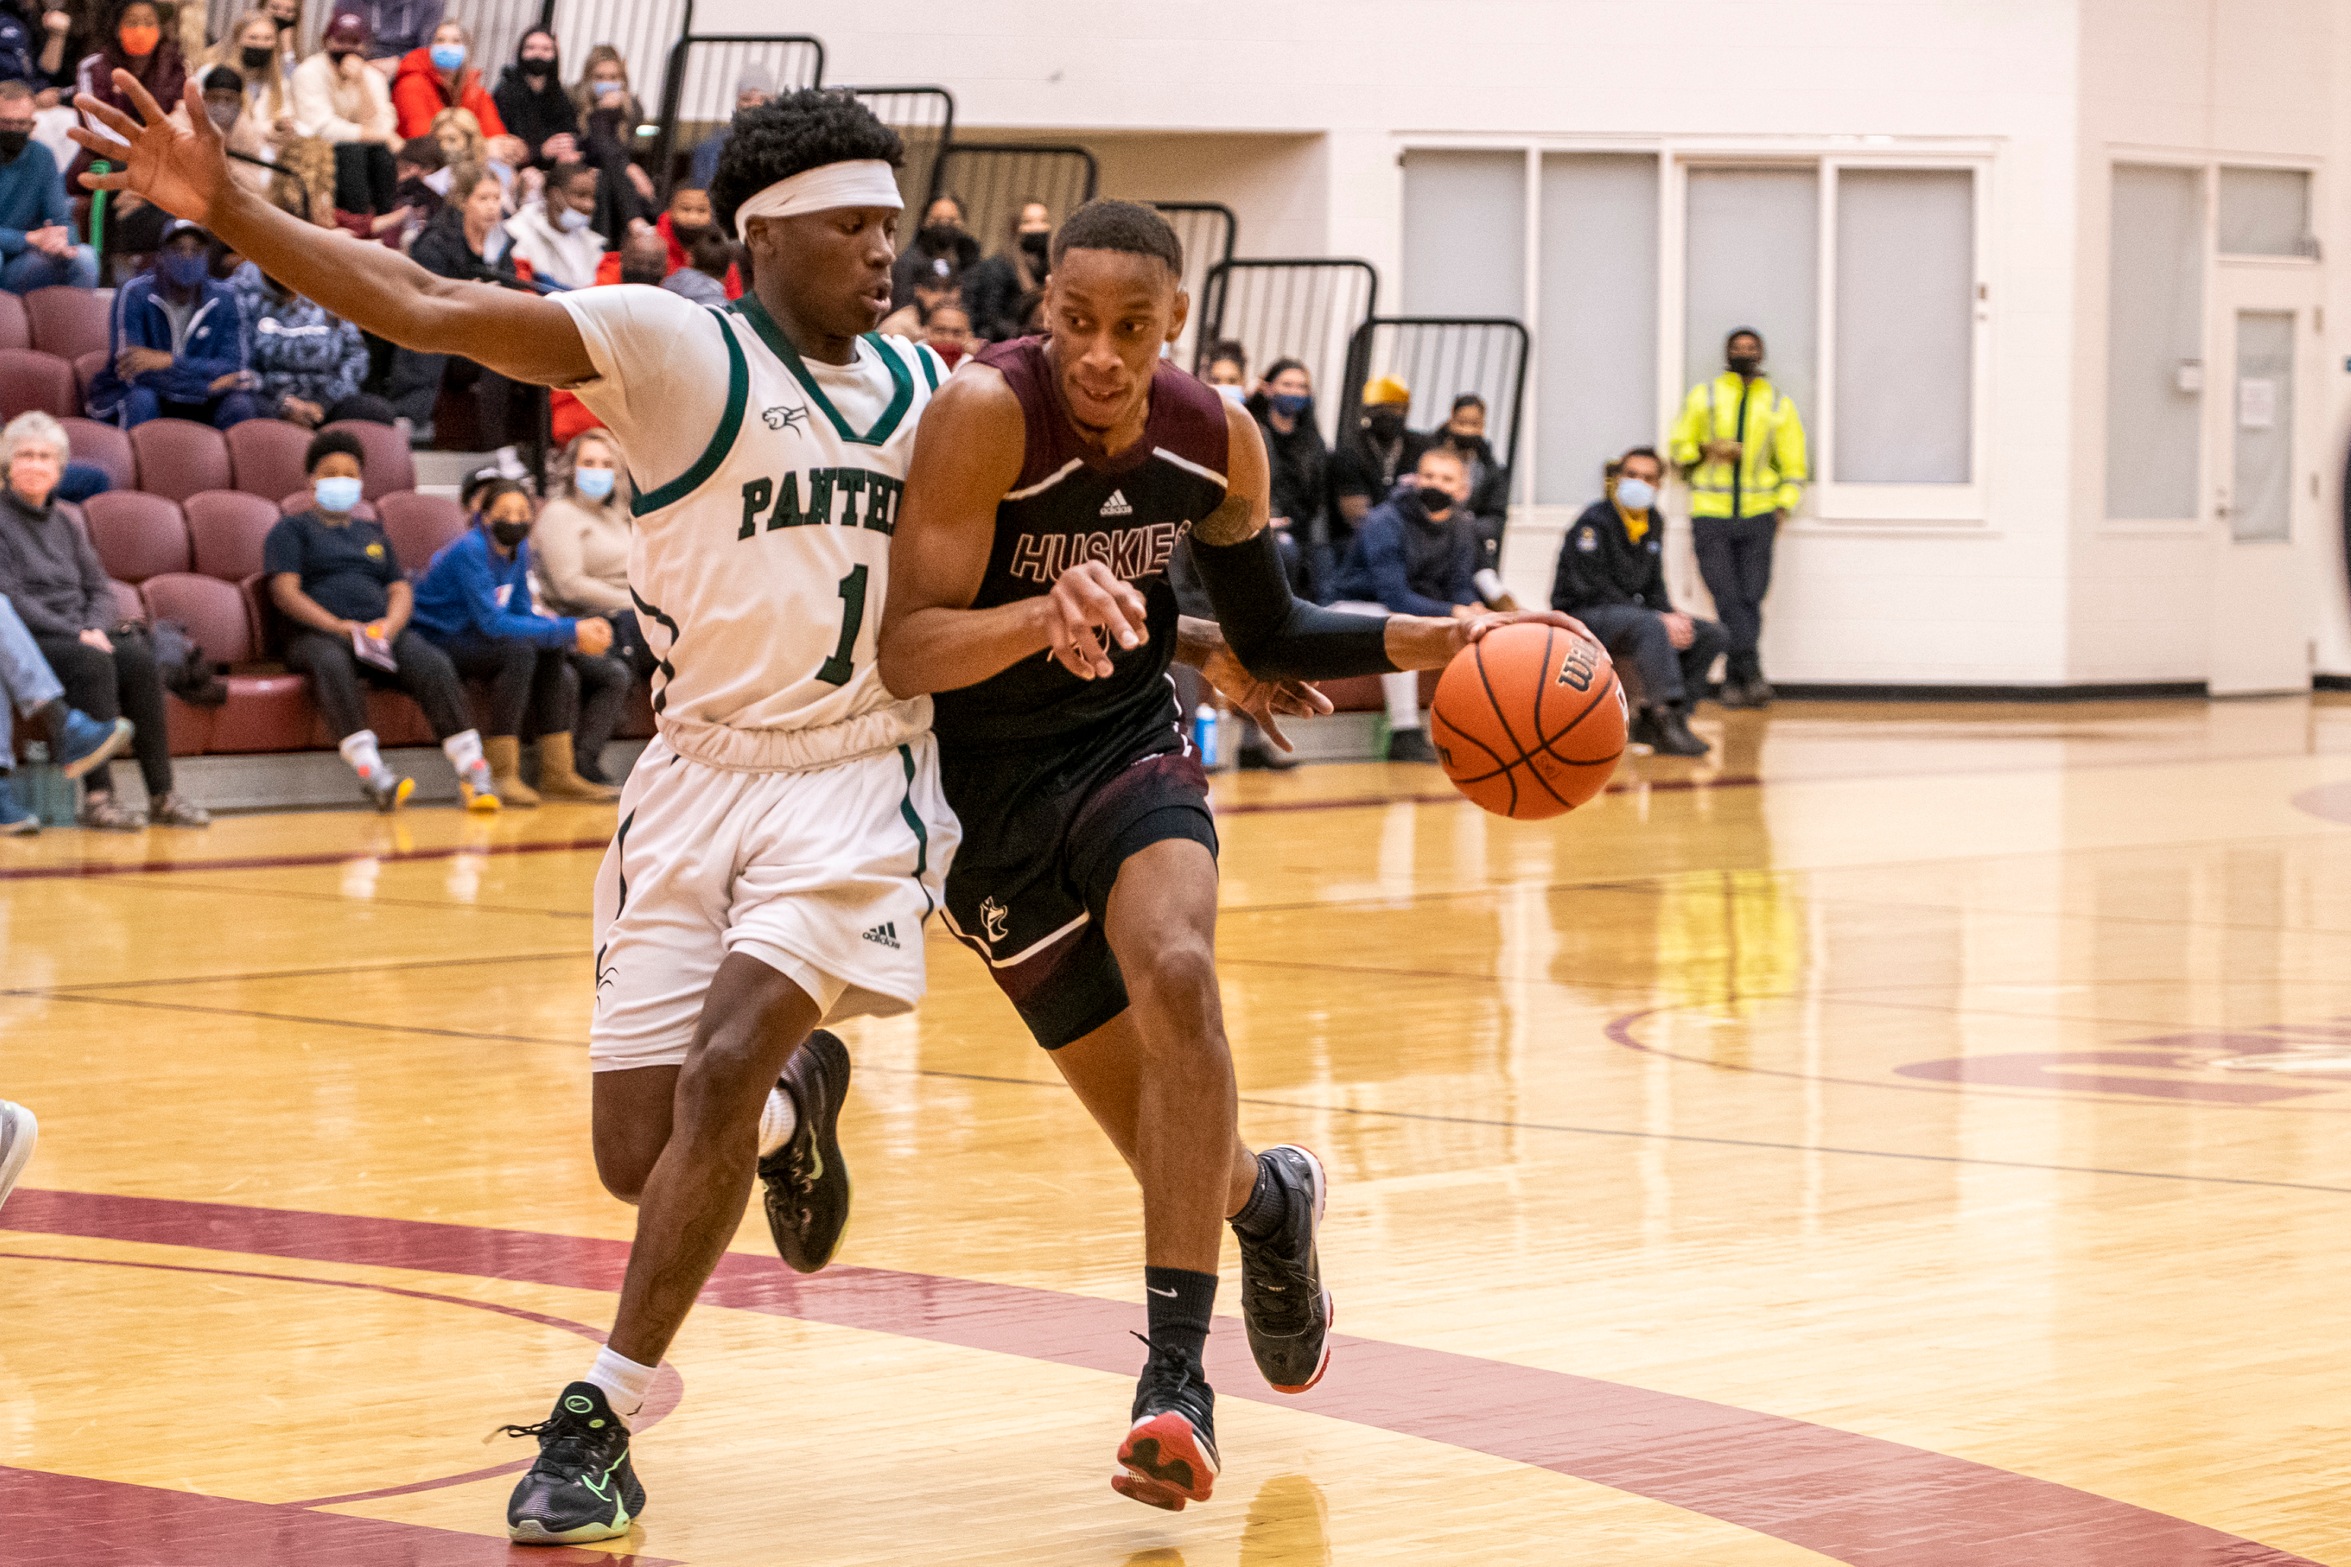 Saint Mary's Huskies forward Qyemah Gibson battles with UPEI Panthers guard Kamari Scott on Nov. 20, 2021. Gibson recorded 22 points and 5 rebounds in the Panthers 87-81 win. (Photo by Mona Ghiz)